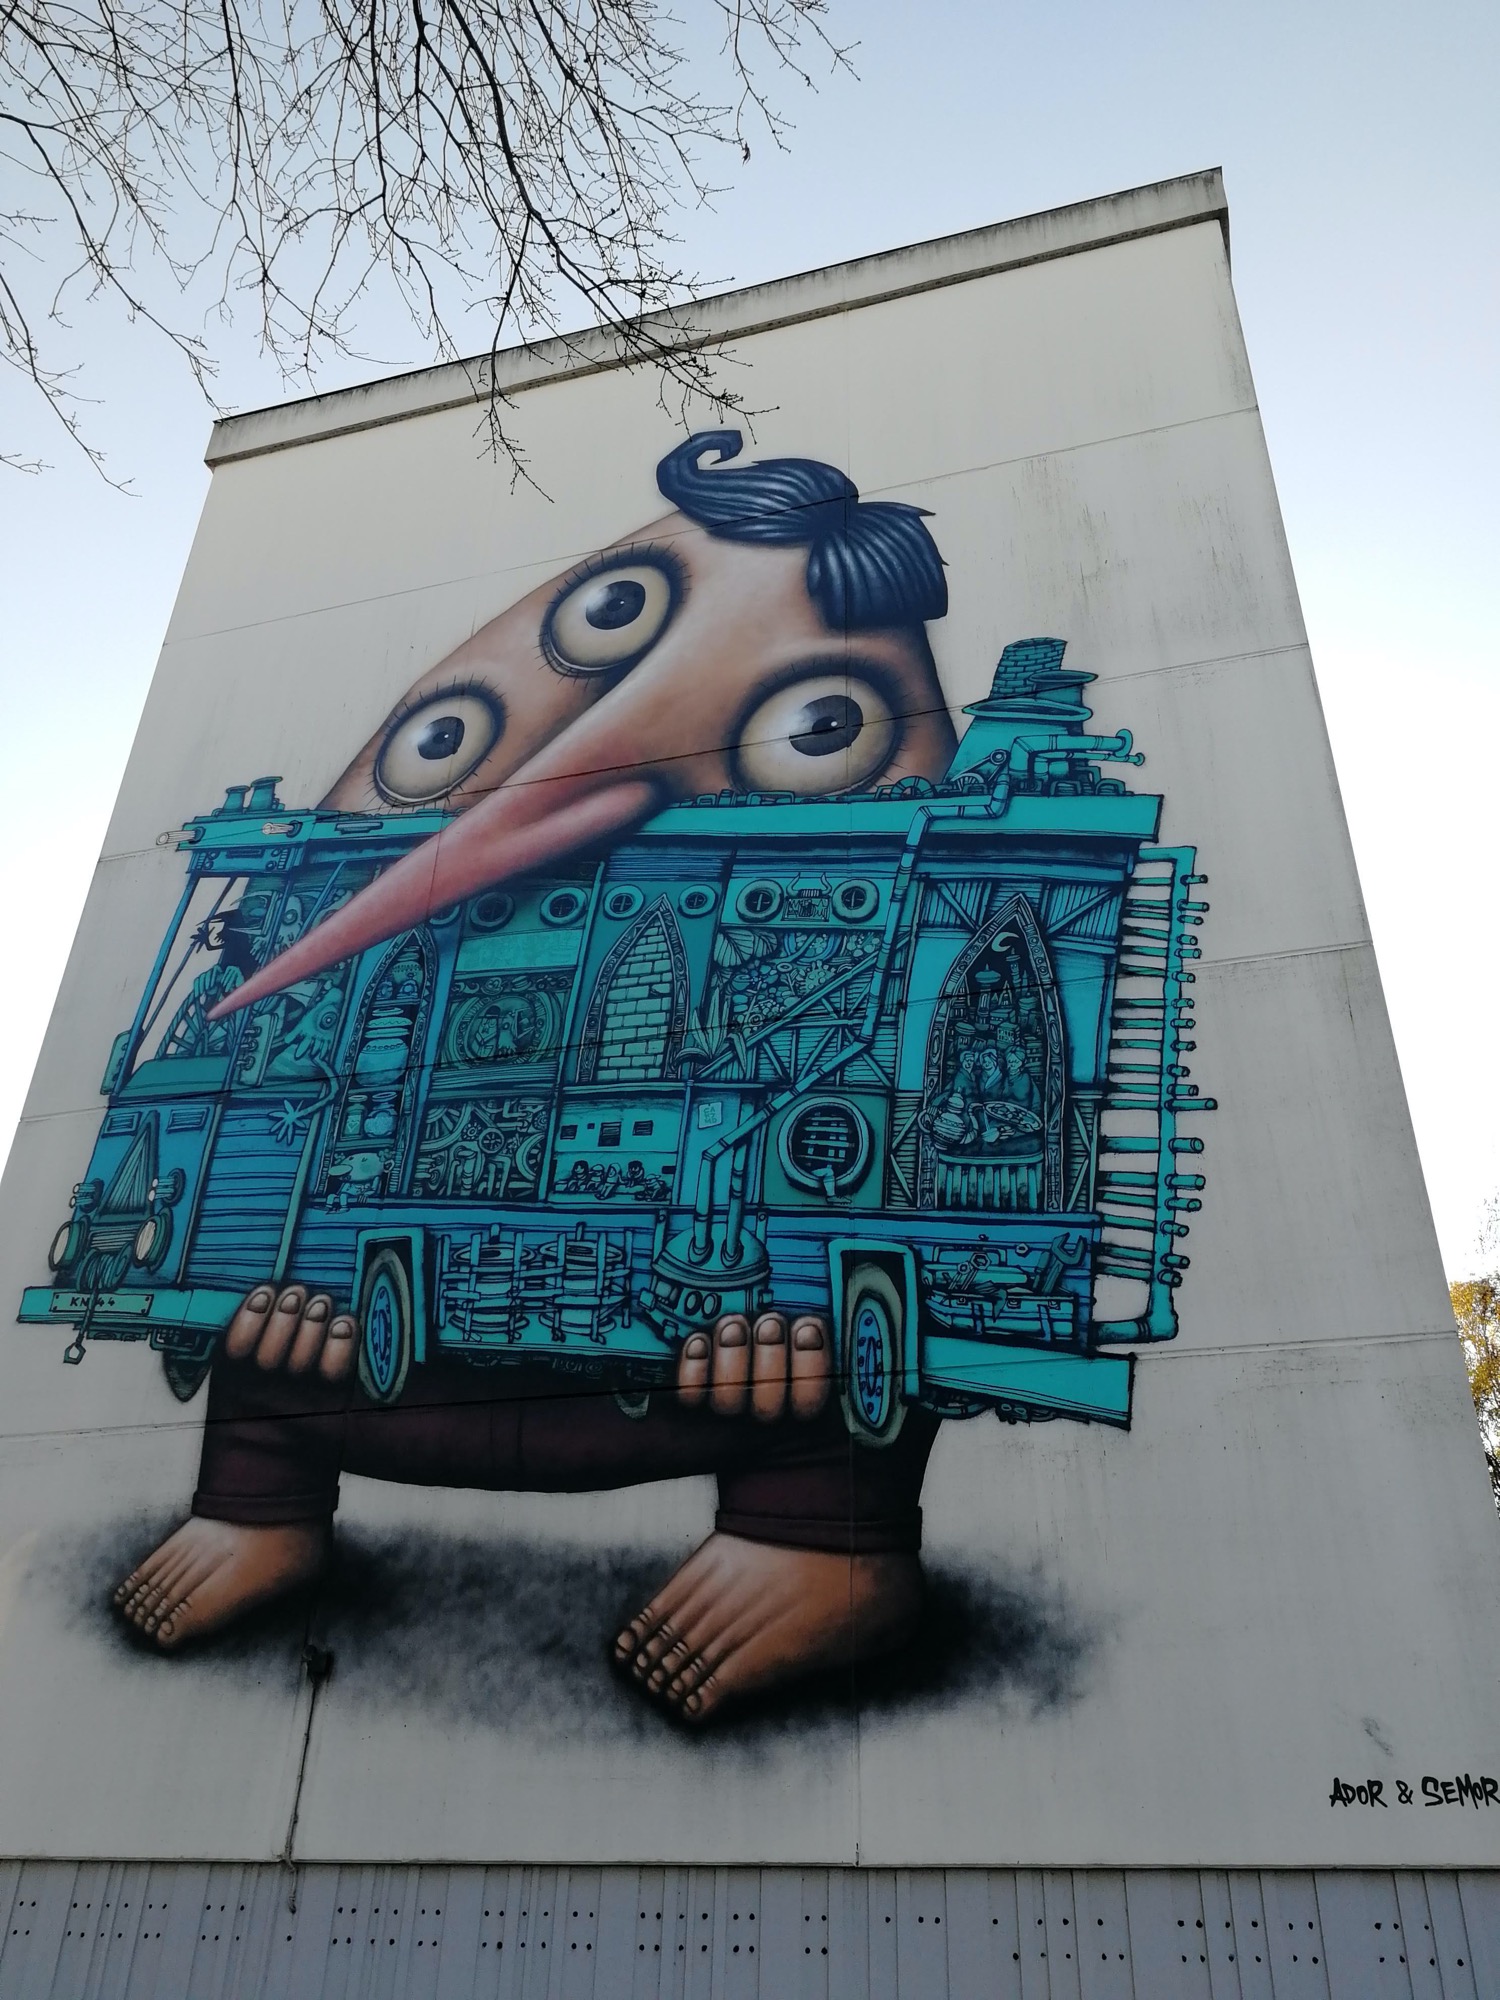 Graffiti 505  by the artist Semor captured by Rabot in Nantes France